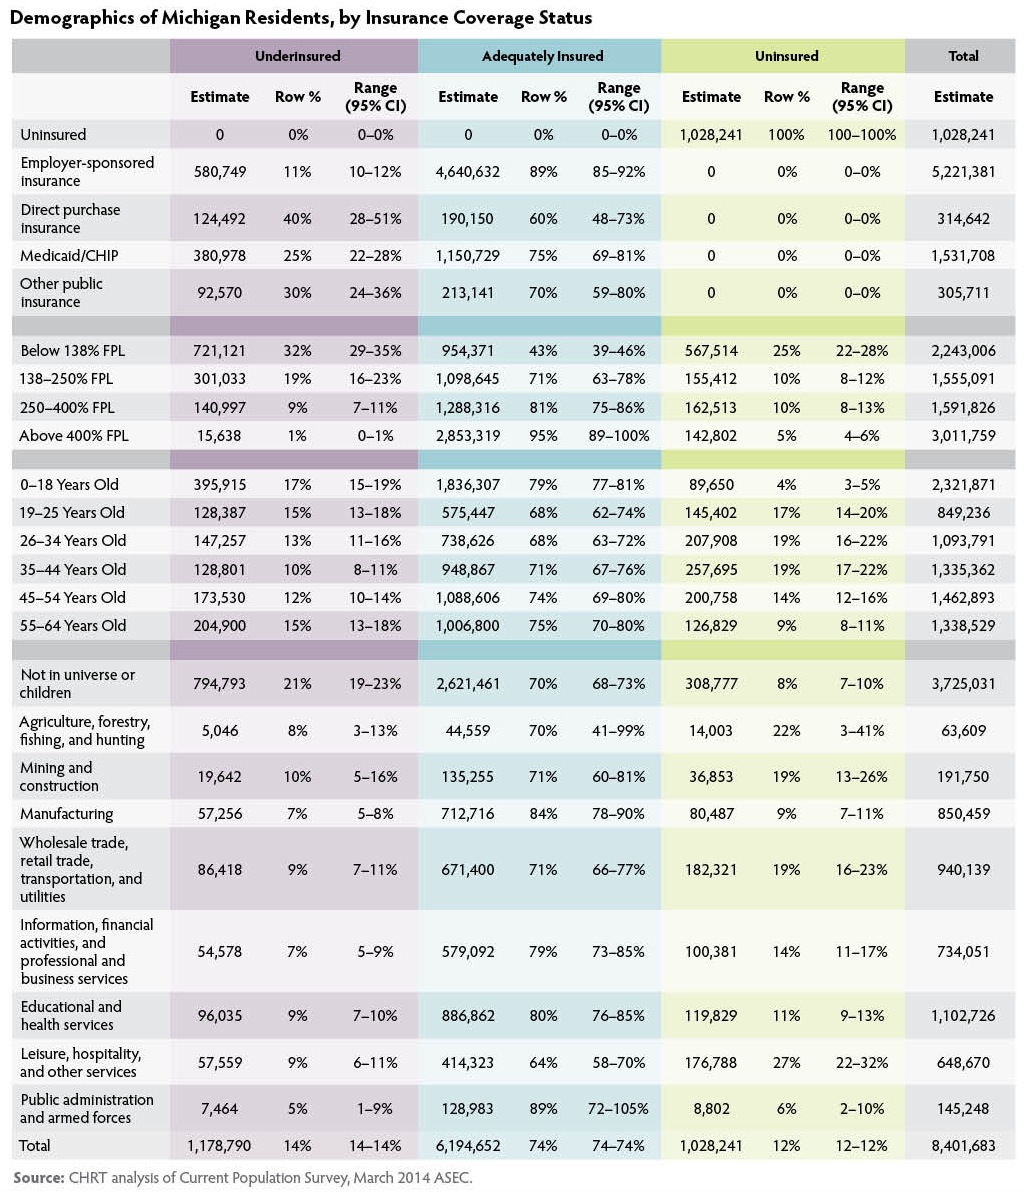 A large table of demographics of Michigan residents by insurance coverage status.